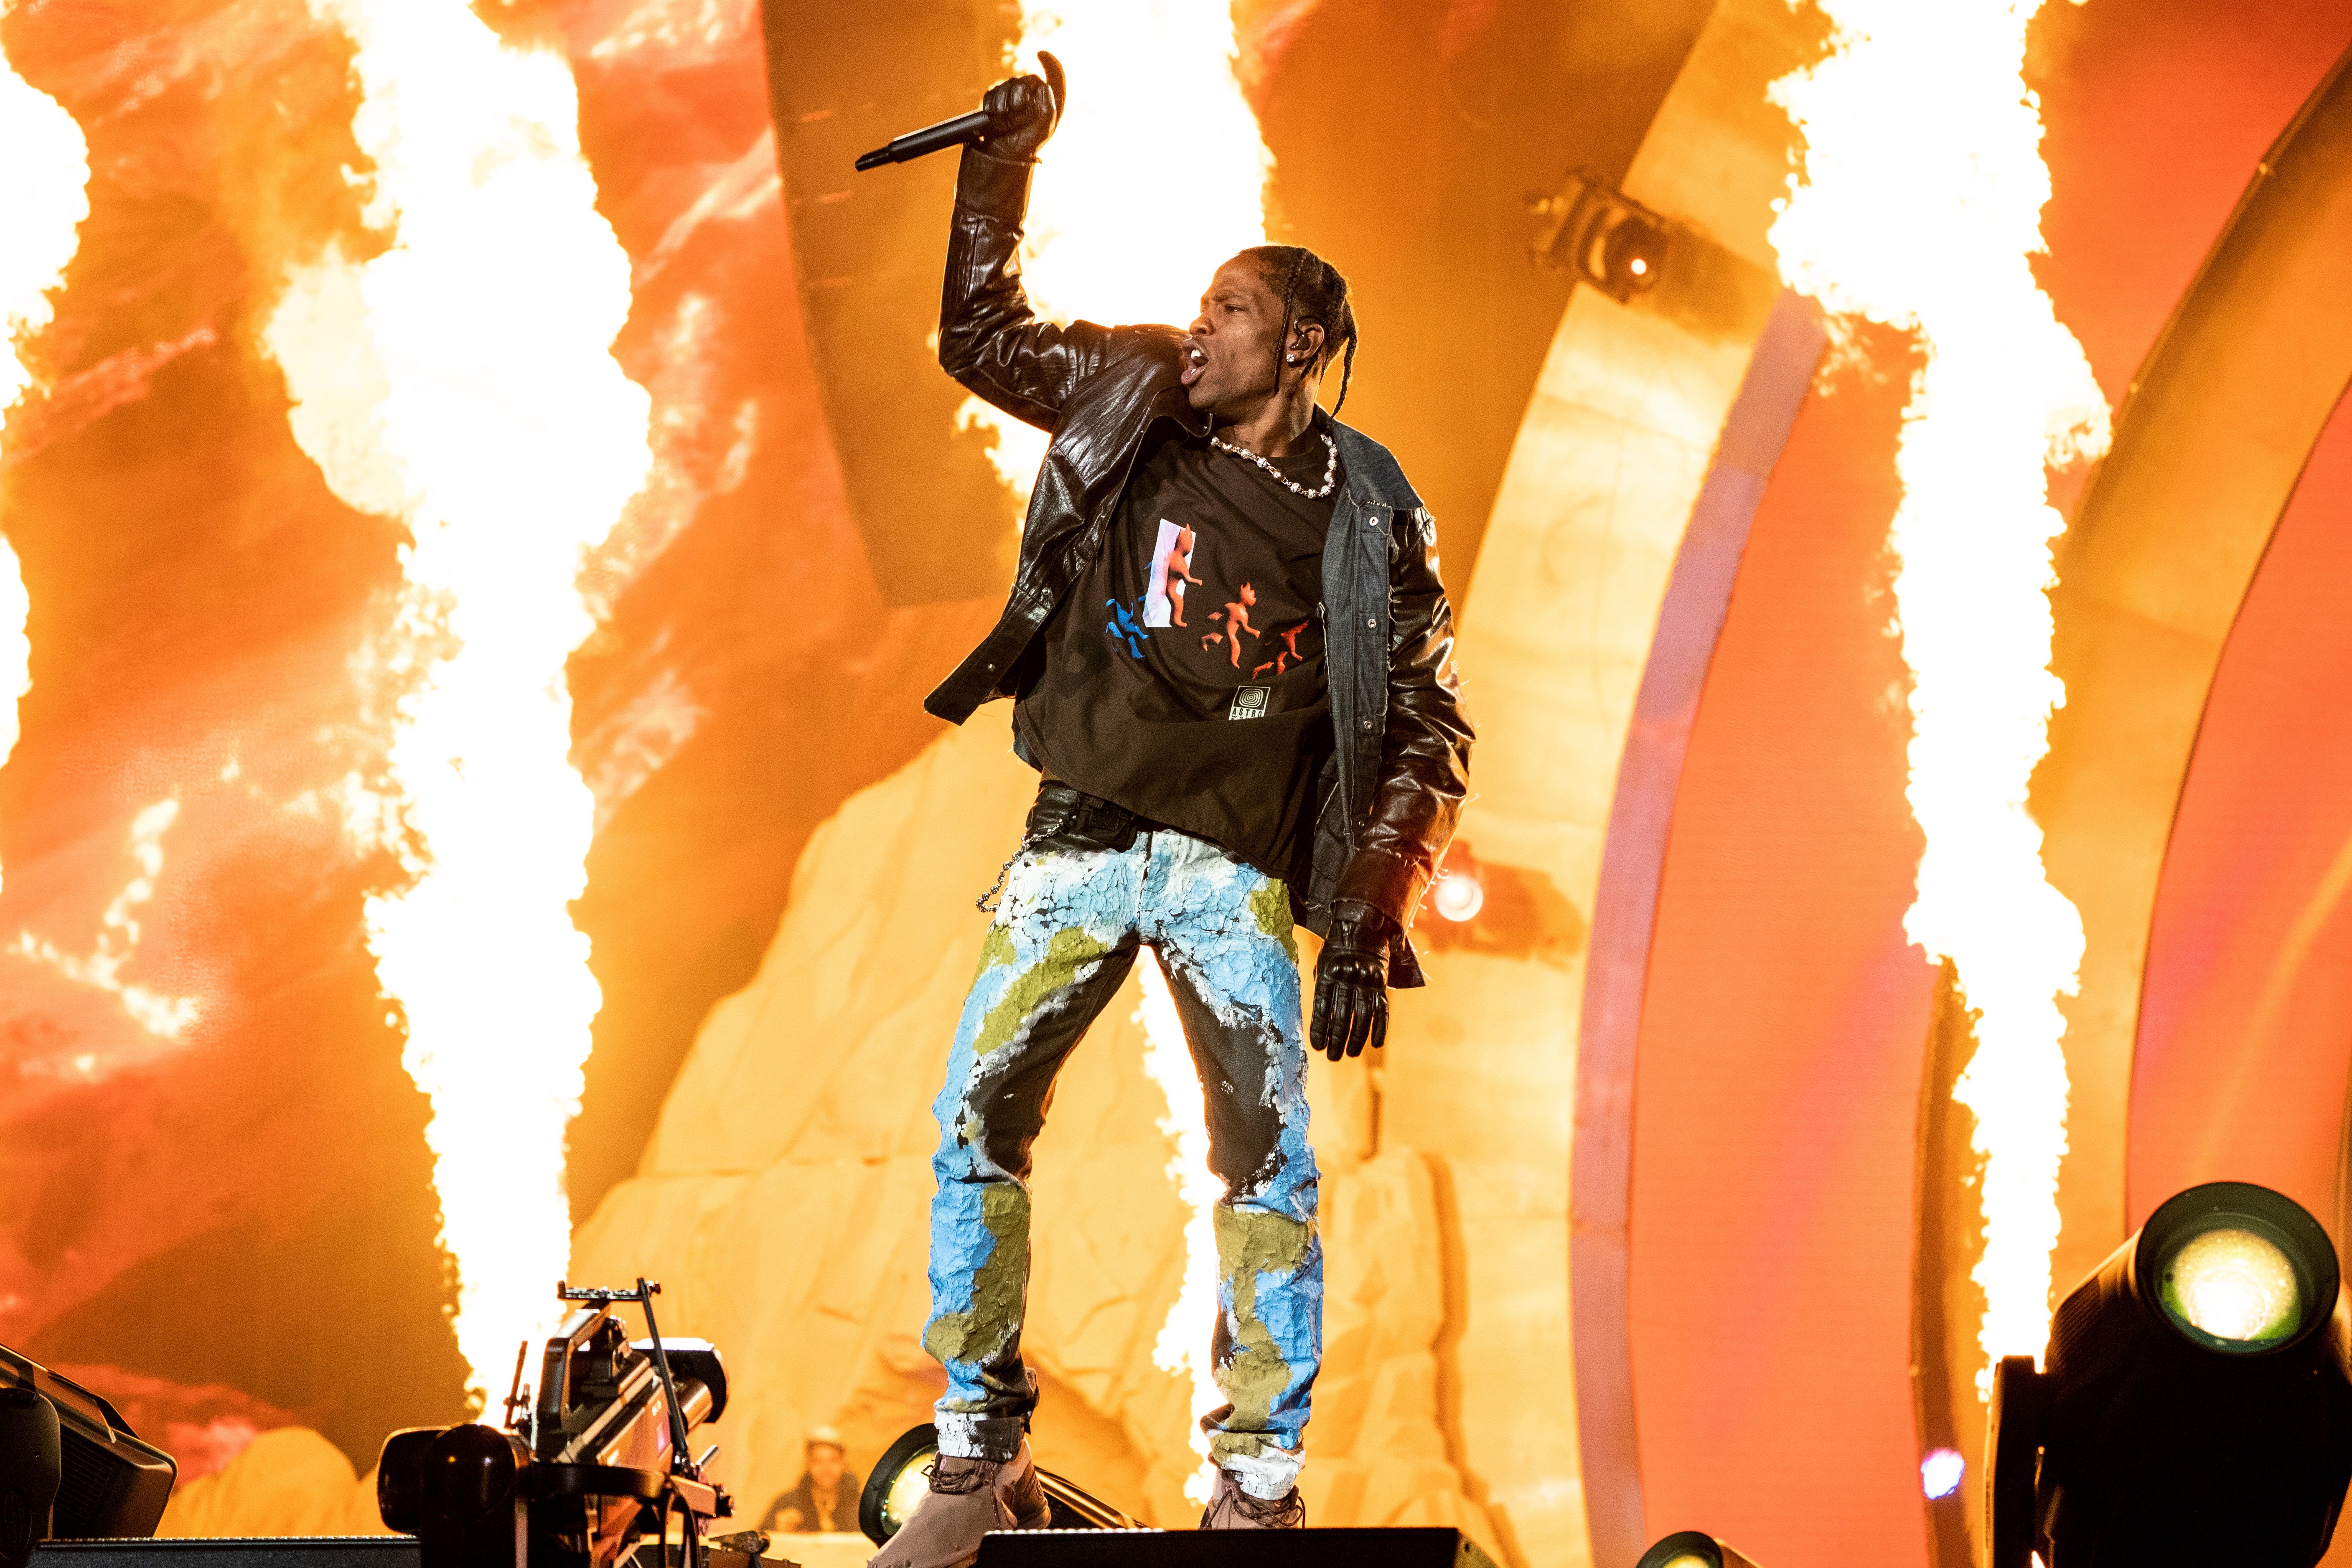 Travis Scott performs at the Astroworld Music Festival in Houston on Nov. 5, 2021.